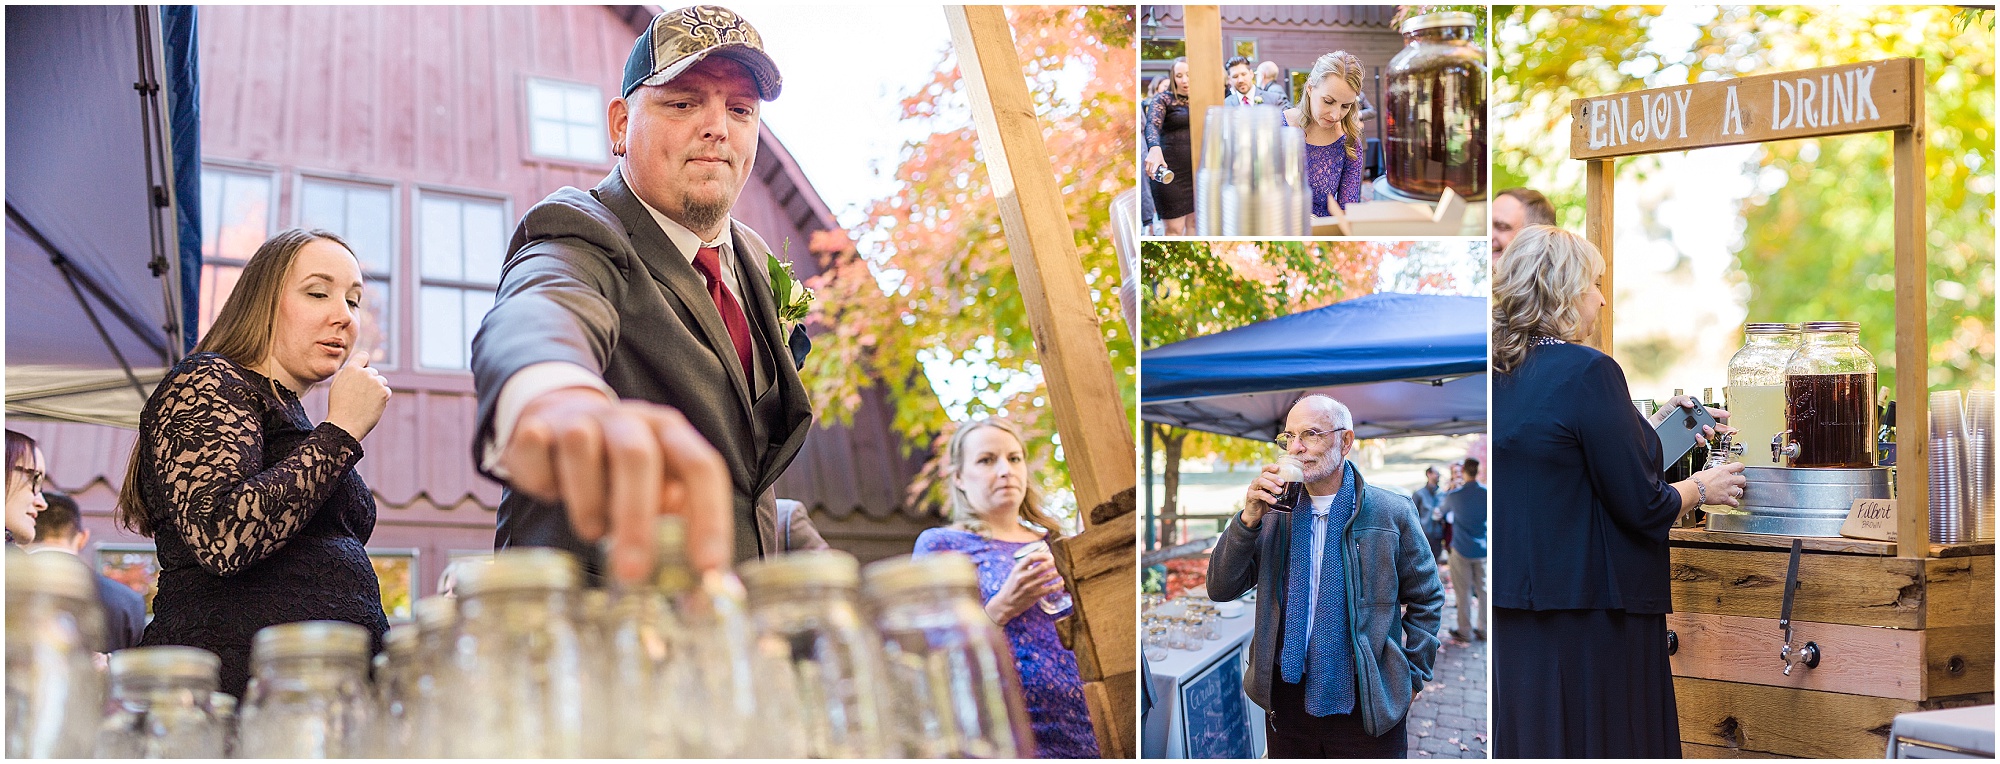 Wedding guests enjoy the cocktail hour on the patio of Hollinshead Barn in Bend, OR. | Erica Swantek Photography